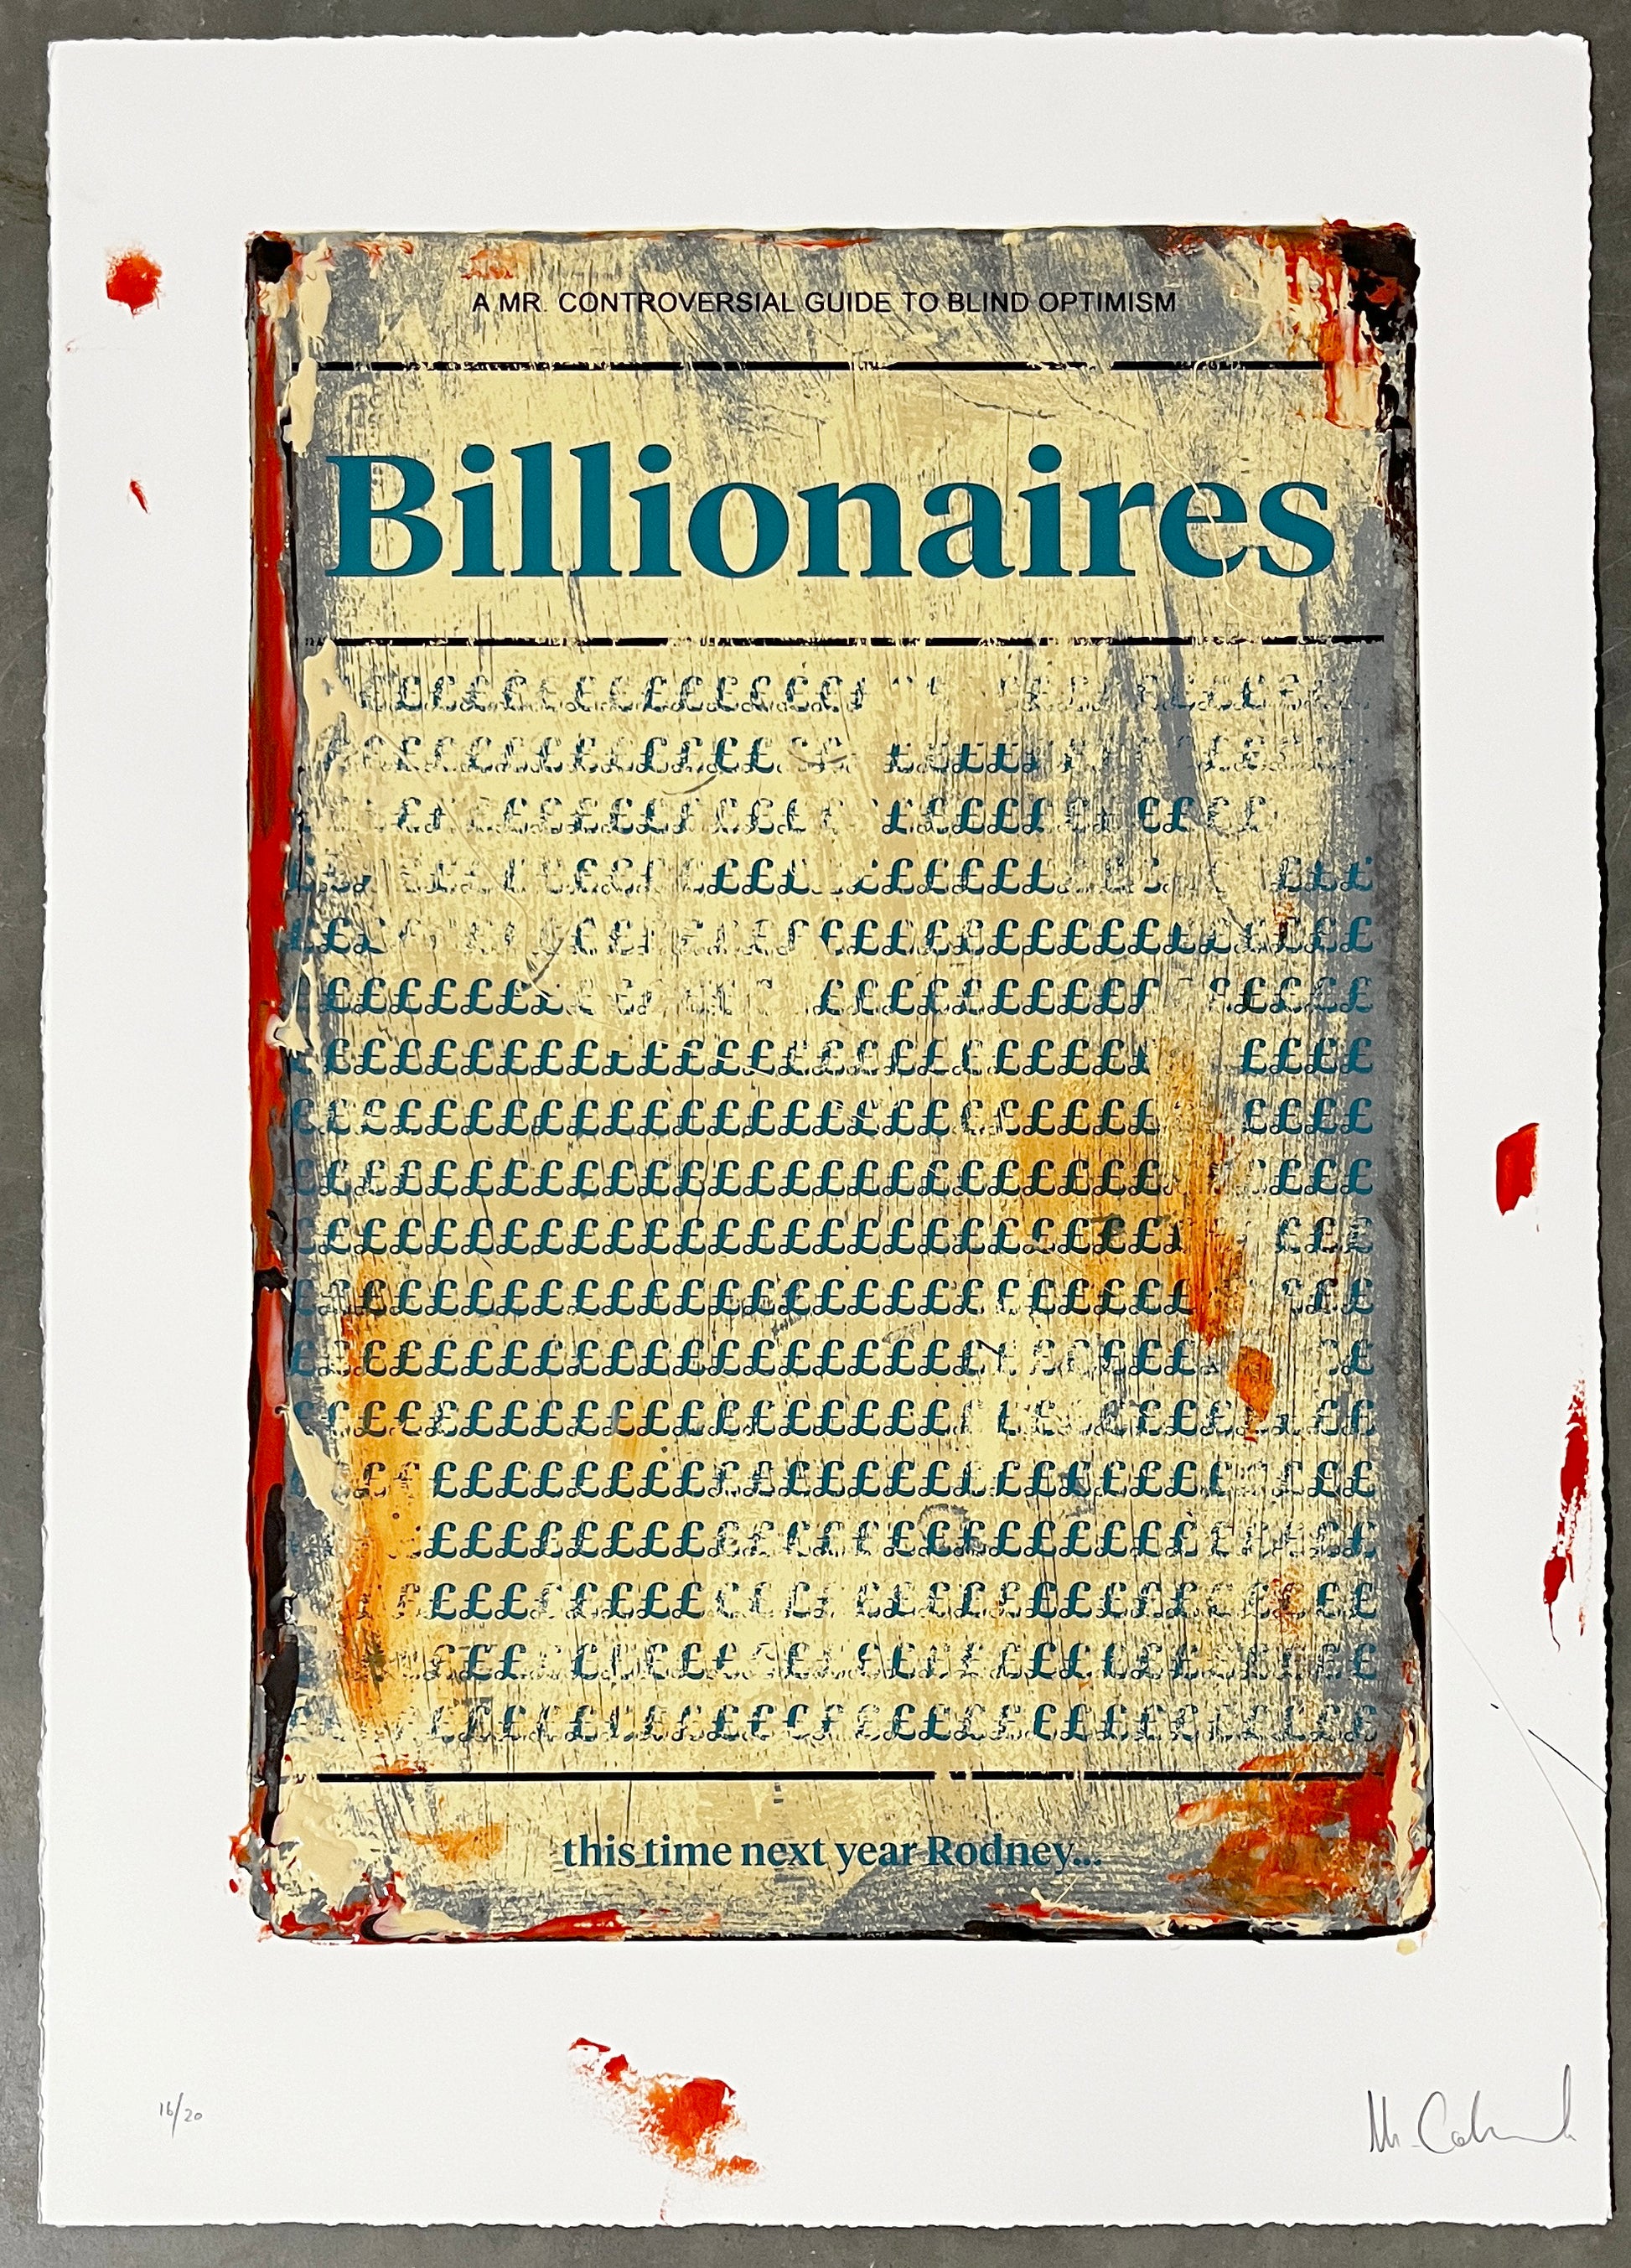 Mr Controversial, Artist, Billionaires, Edition 16 hand-finished limited edition, TAP Galleries, Essex Chelmsford Art Gallery 